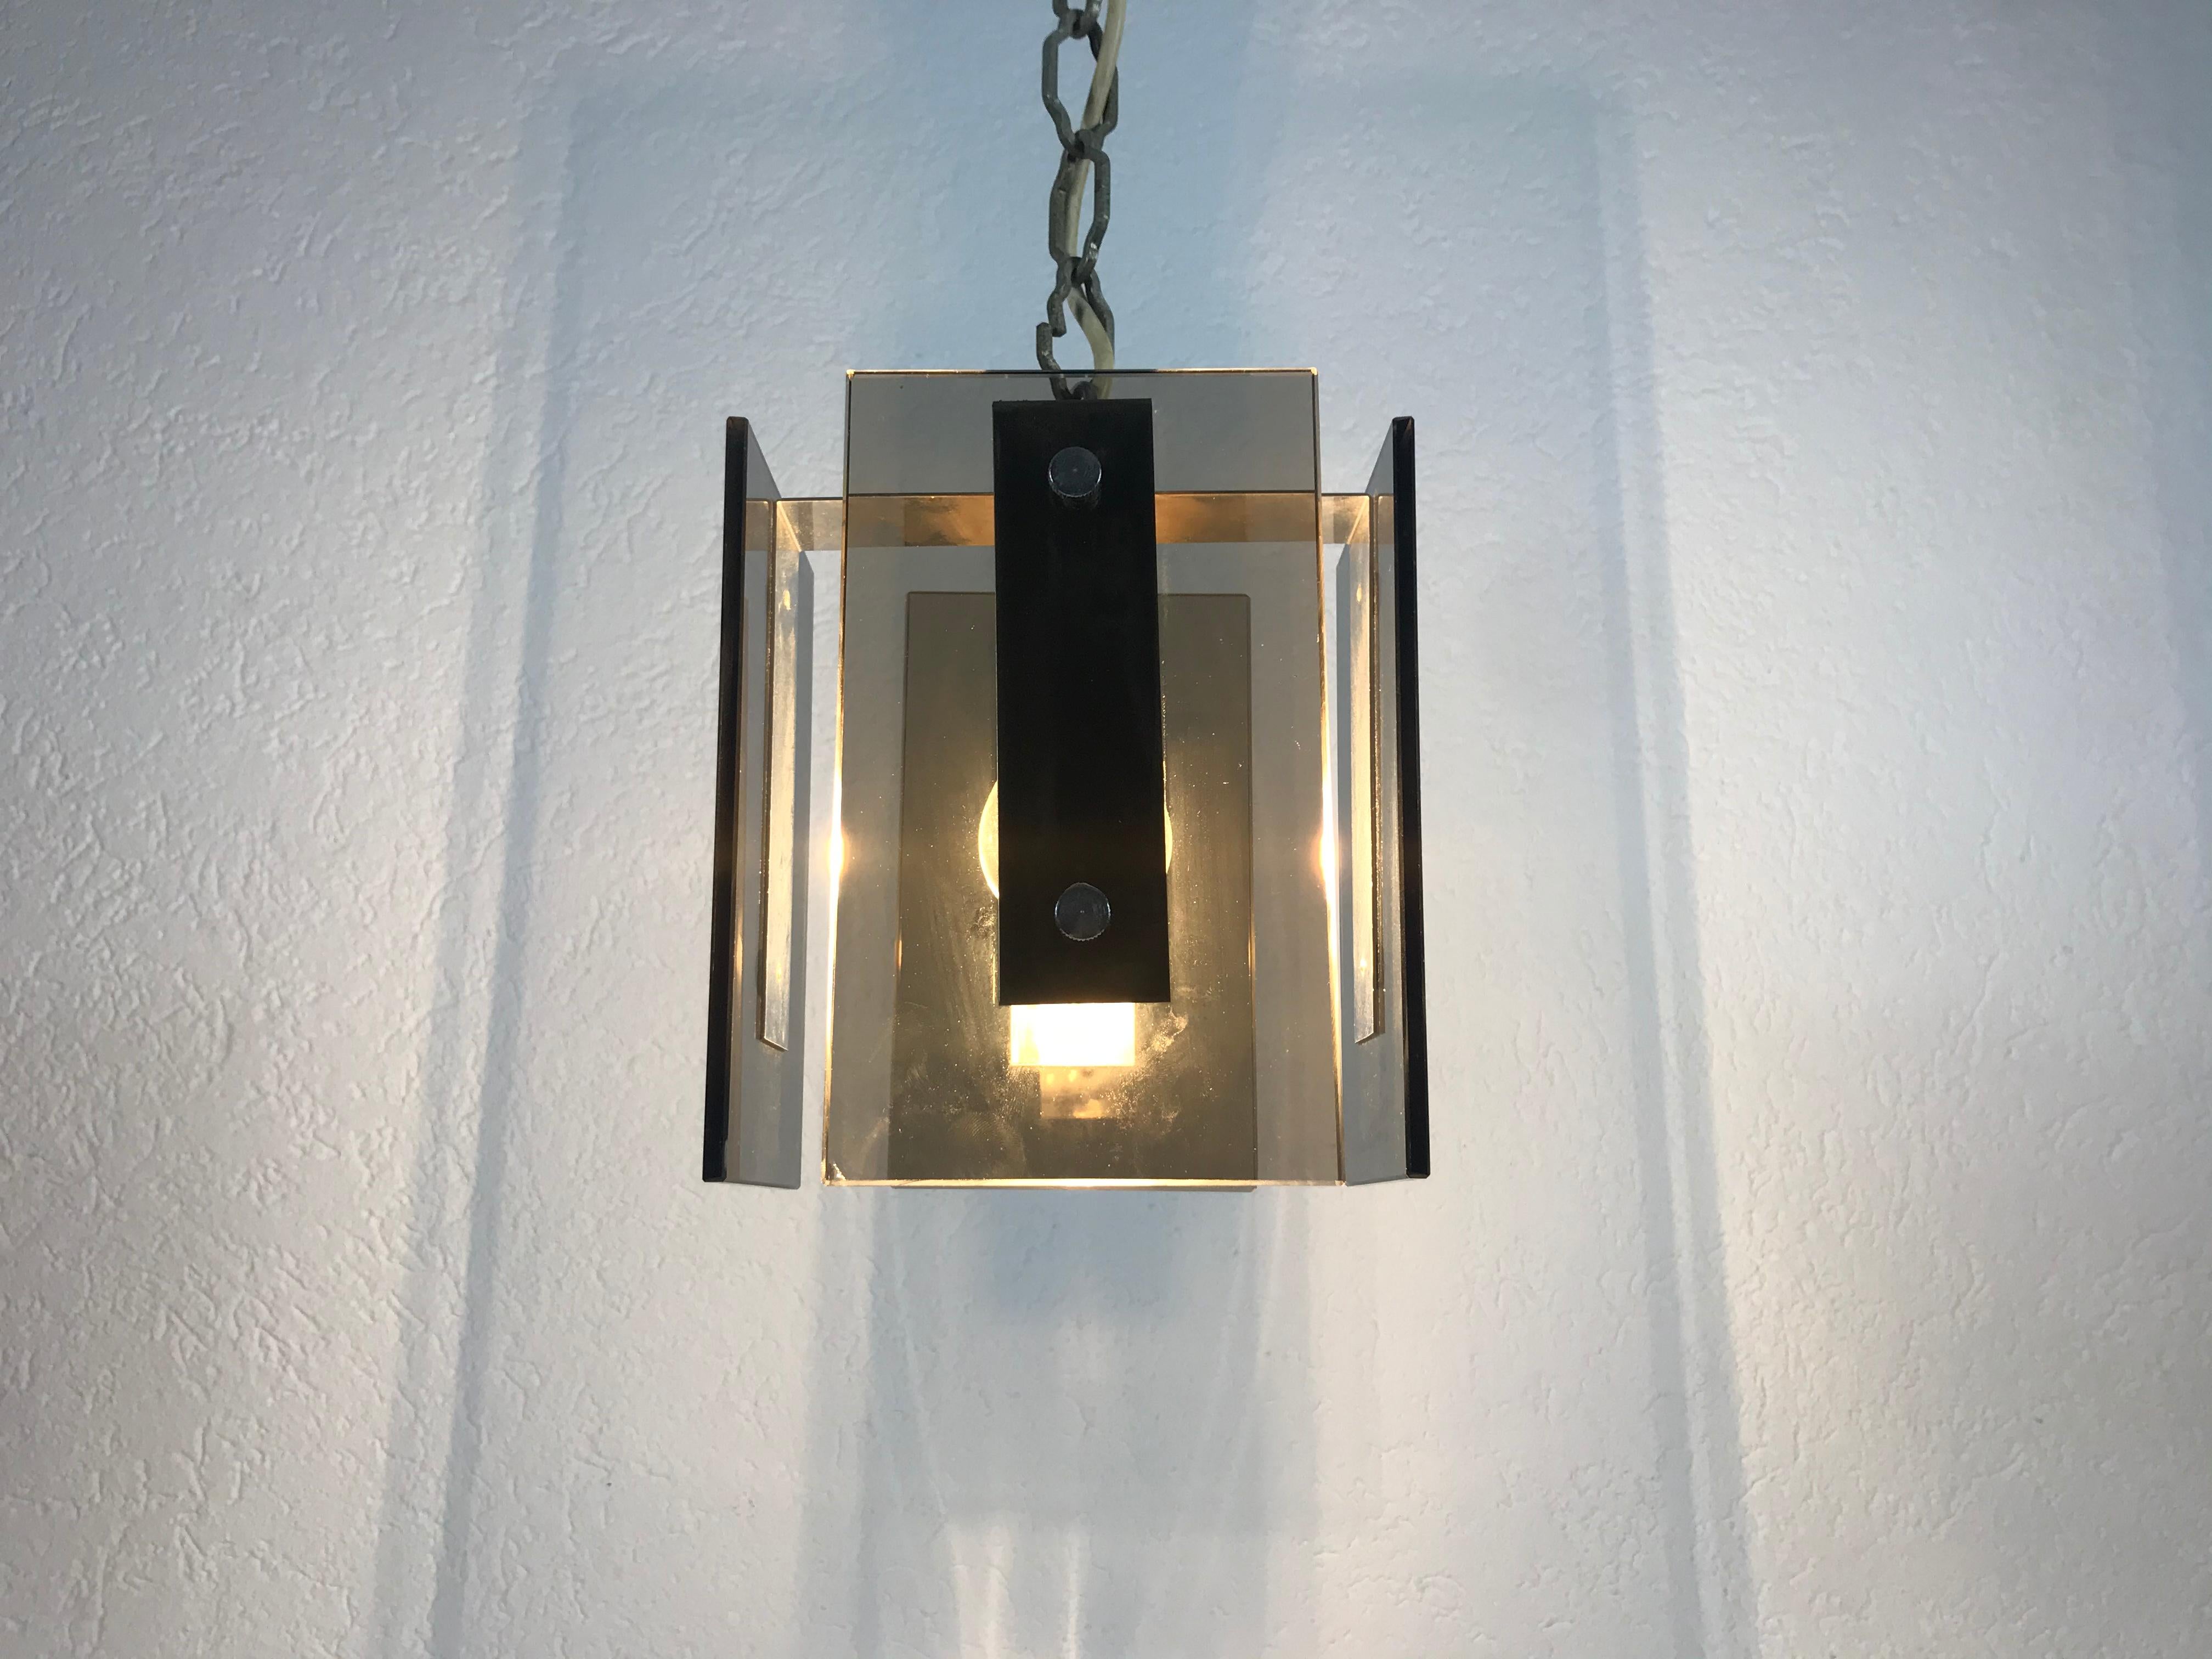 Square Glass Ceiling Light by Veca, 1970s, Italy For Sale 4